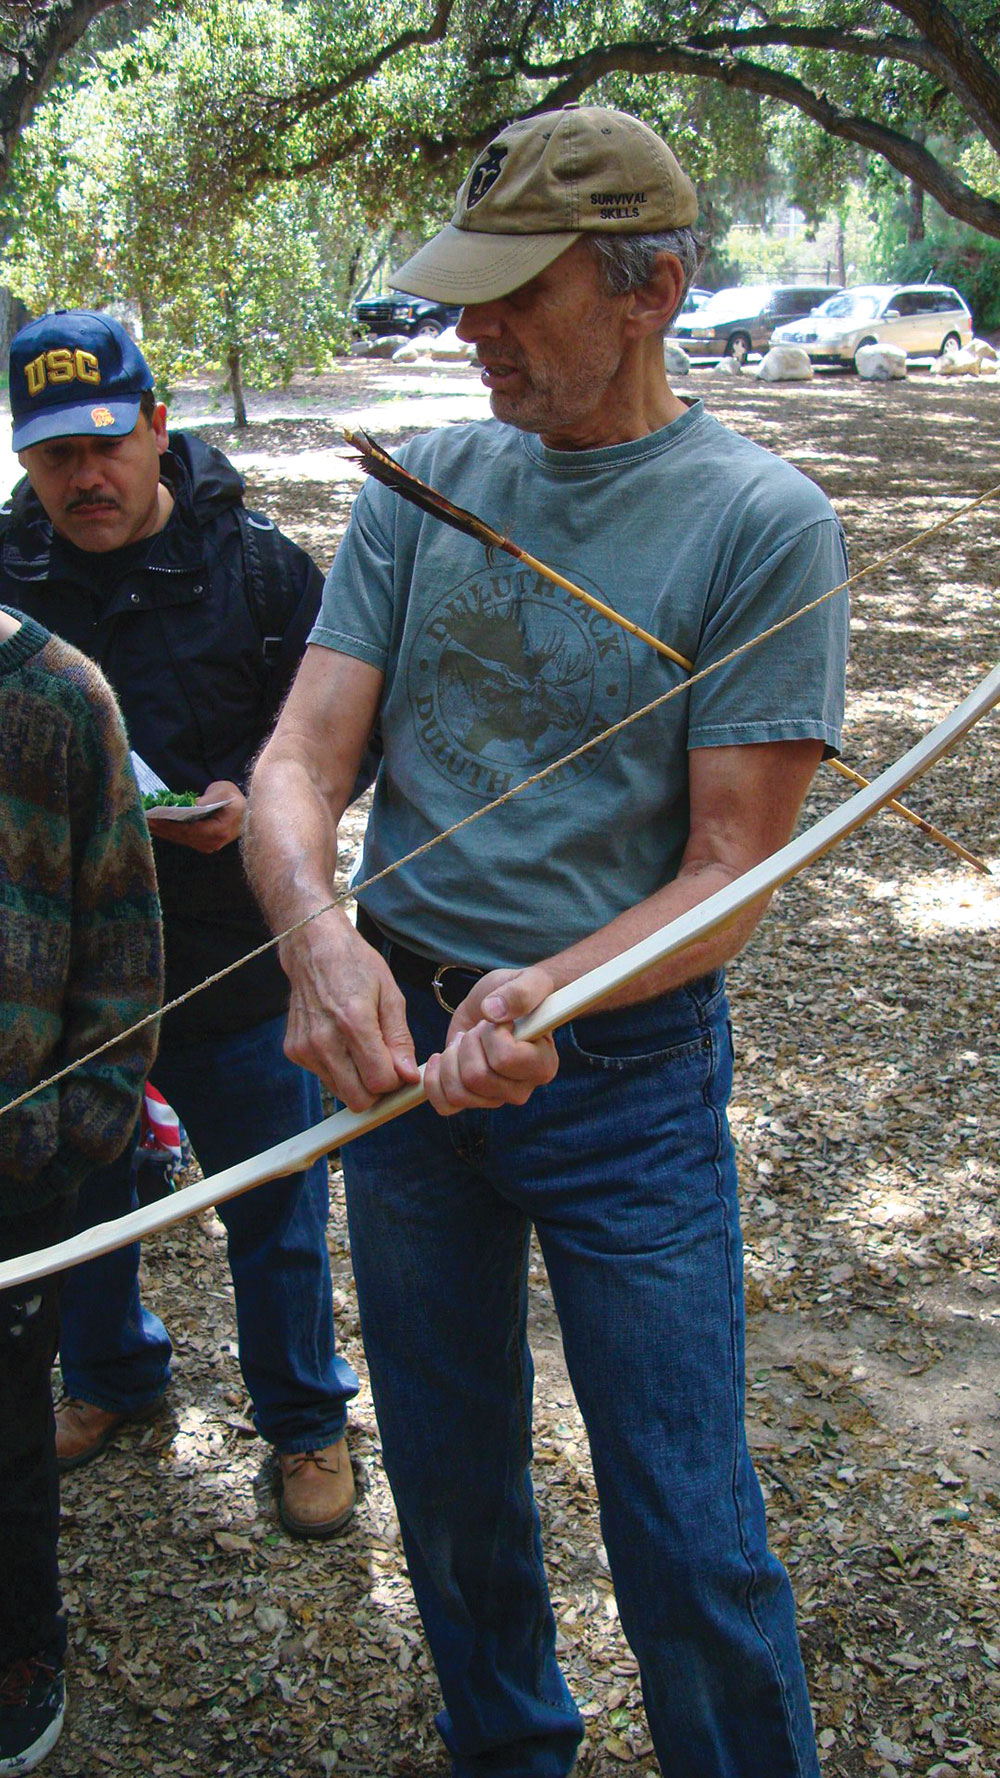 At a workshop given by the School of Self-Reliance, author and anthropologist Paul Campbell shows a bow he made from entirely primitive techniques after the style of Larry Dean Olsen. 